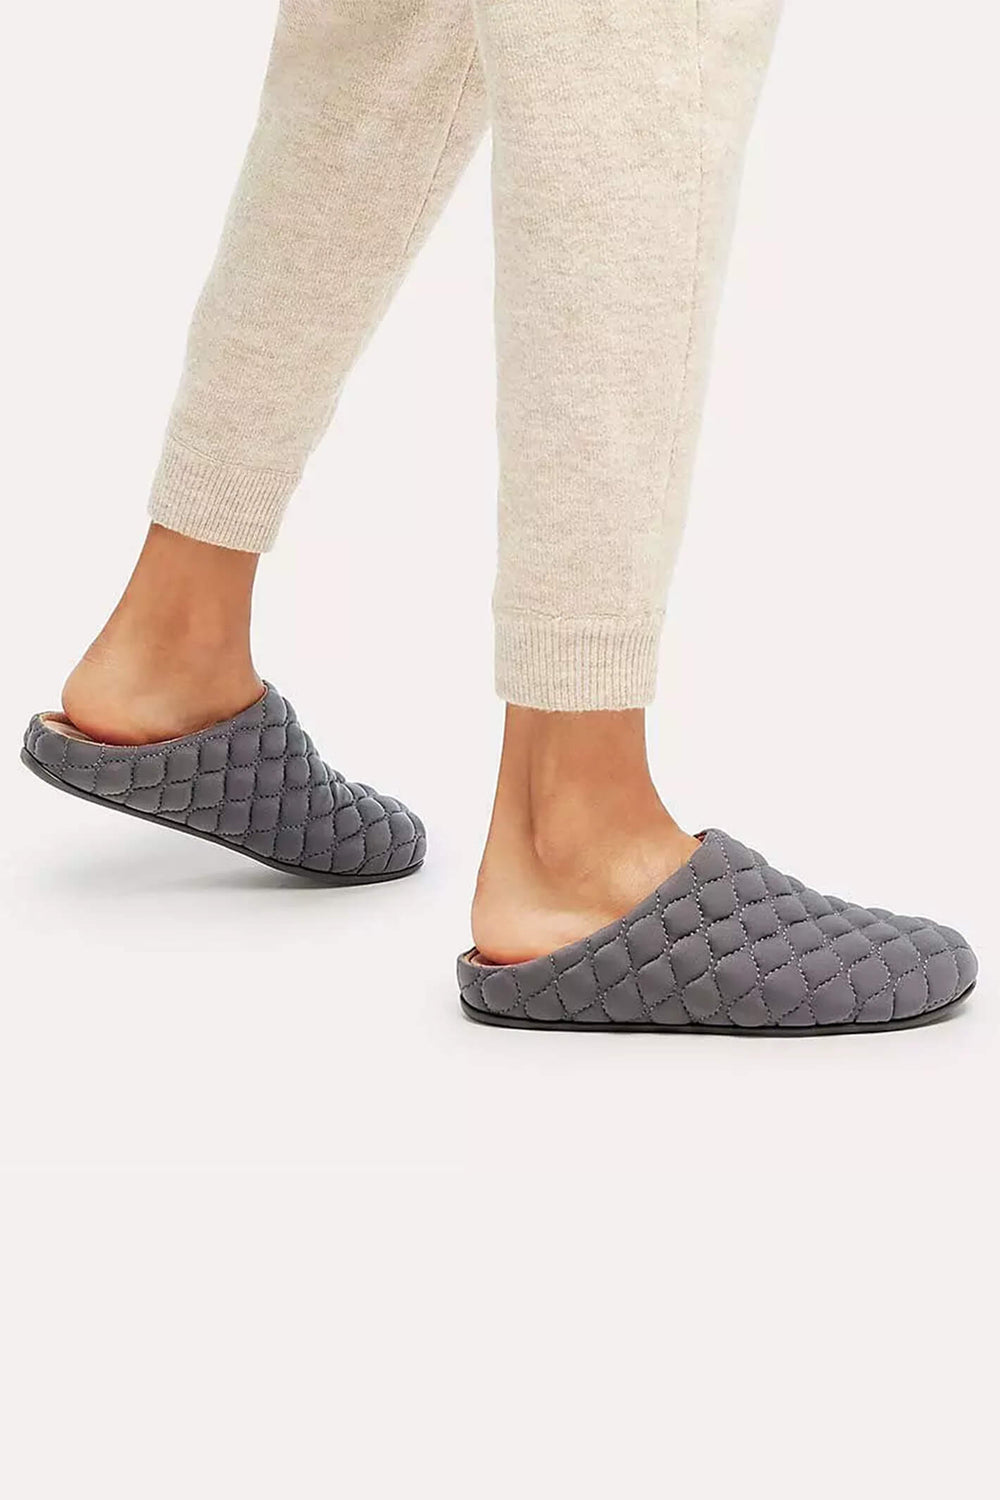 Fitflop Chrissie DY8-861 Pewter Grey Padded Slipper - Shirey Allum Boutique